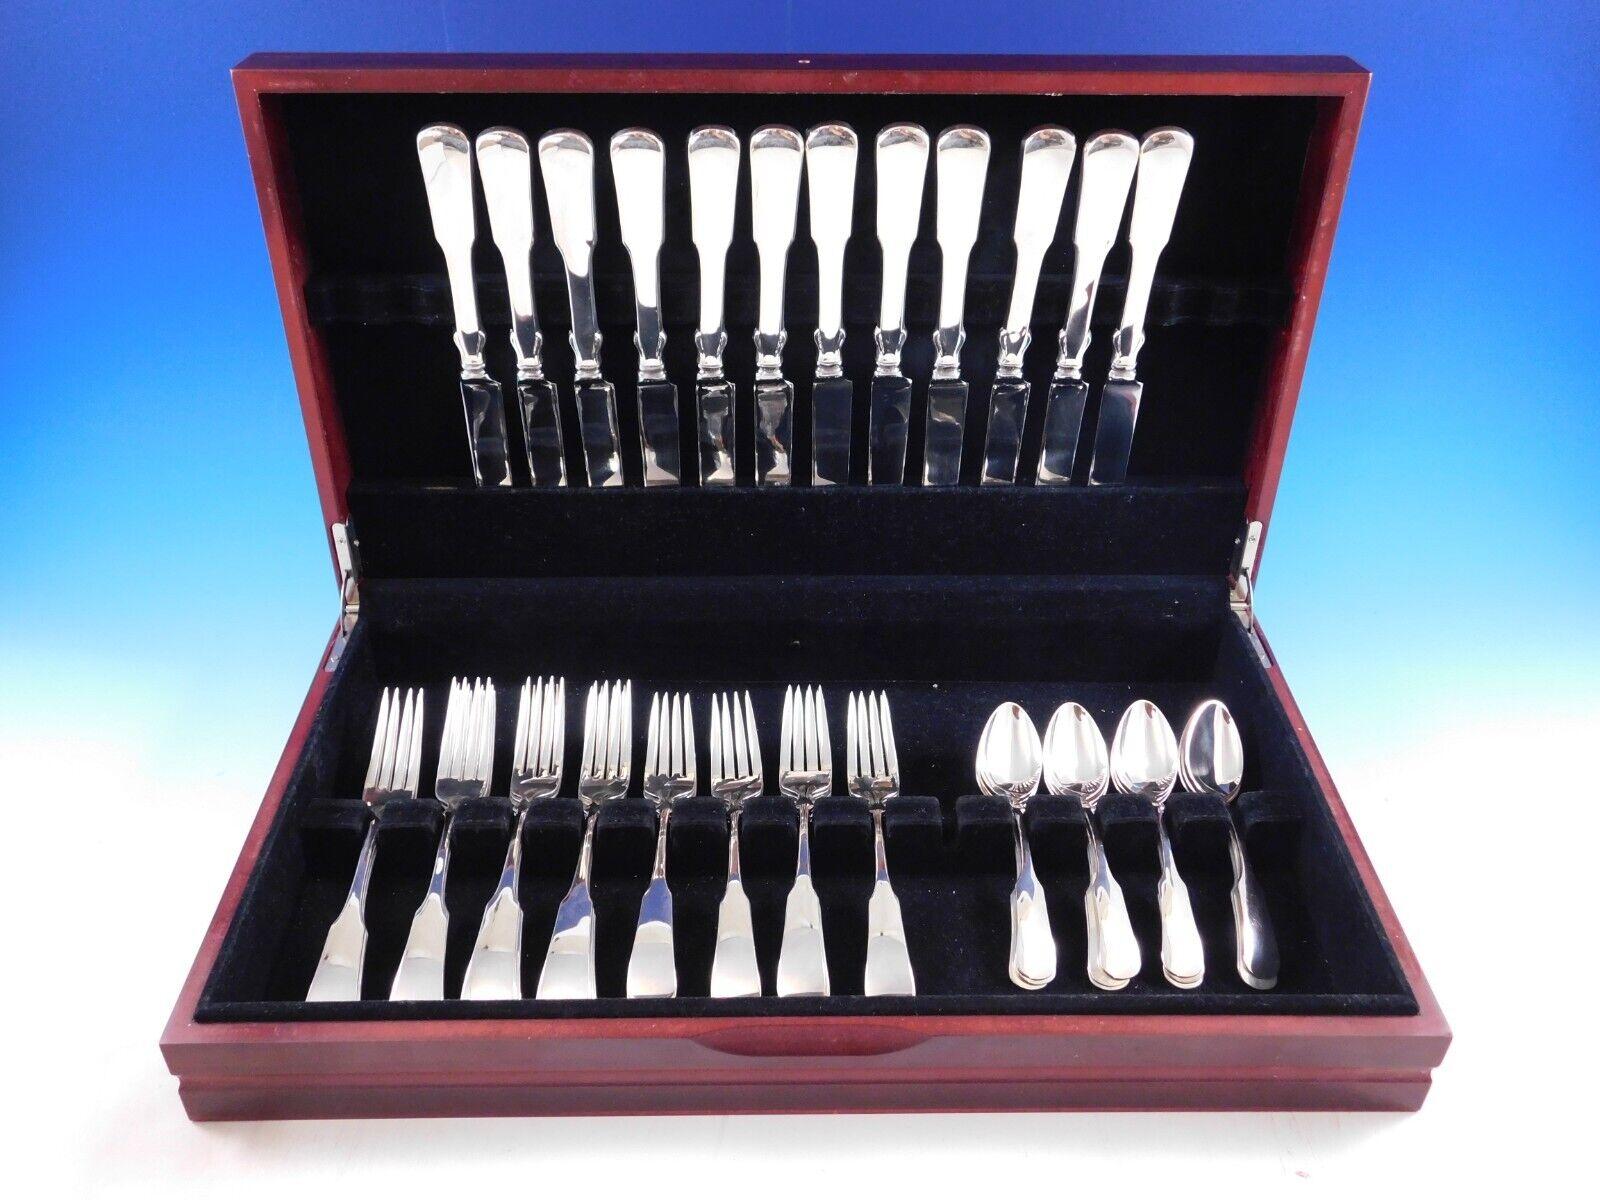 Argent sterling 1690 Sixteen Ninety by Towle Sterling Silver Flatware Set Service 48 pieces en vente